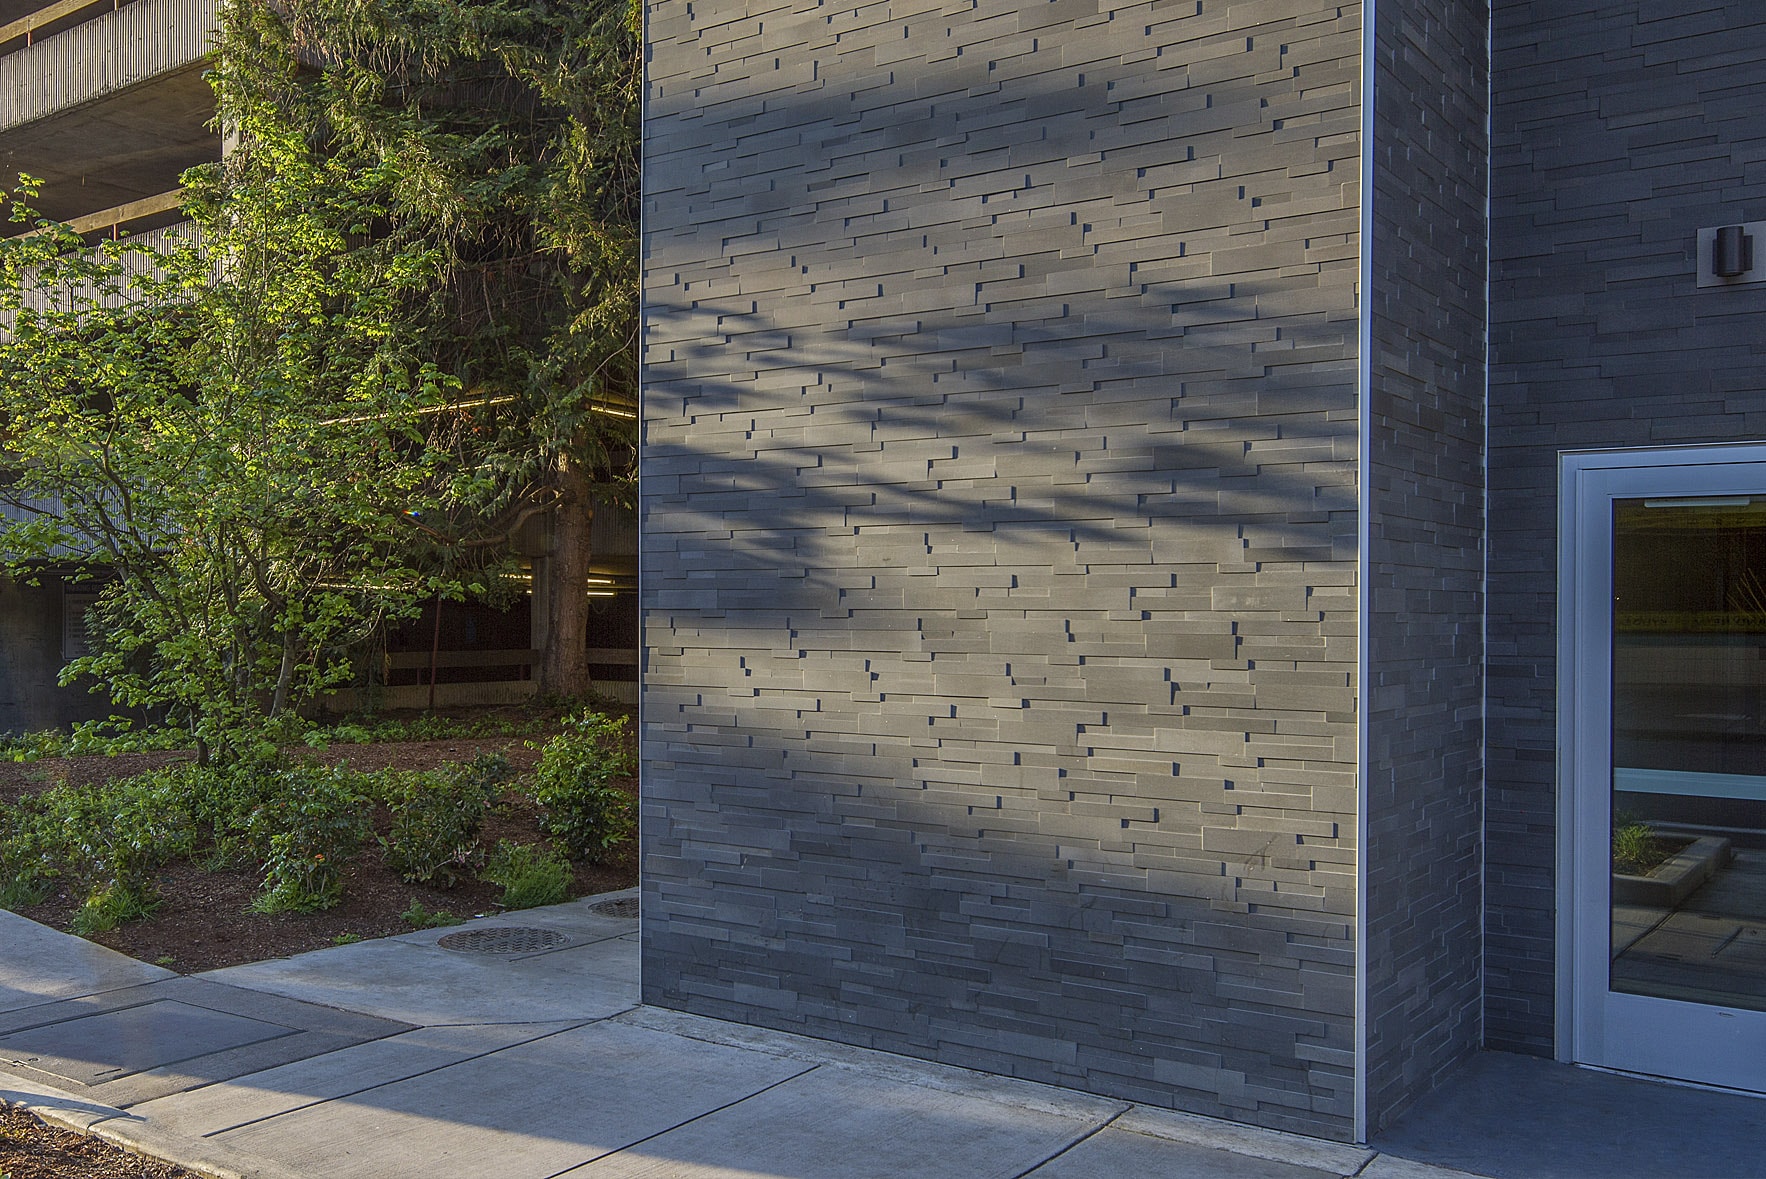 Norstone Grey Aksent 3D Stone Veneer used on a commercial facade with glass door entryway